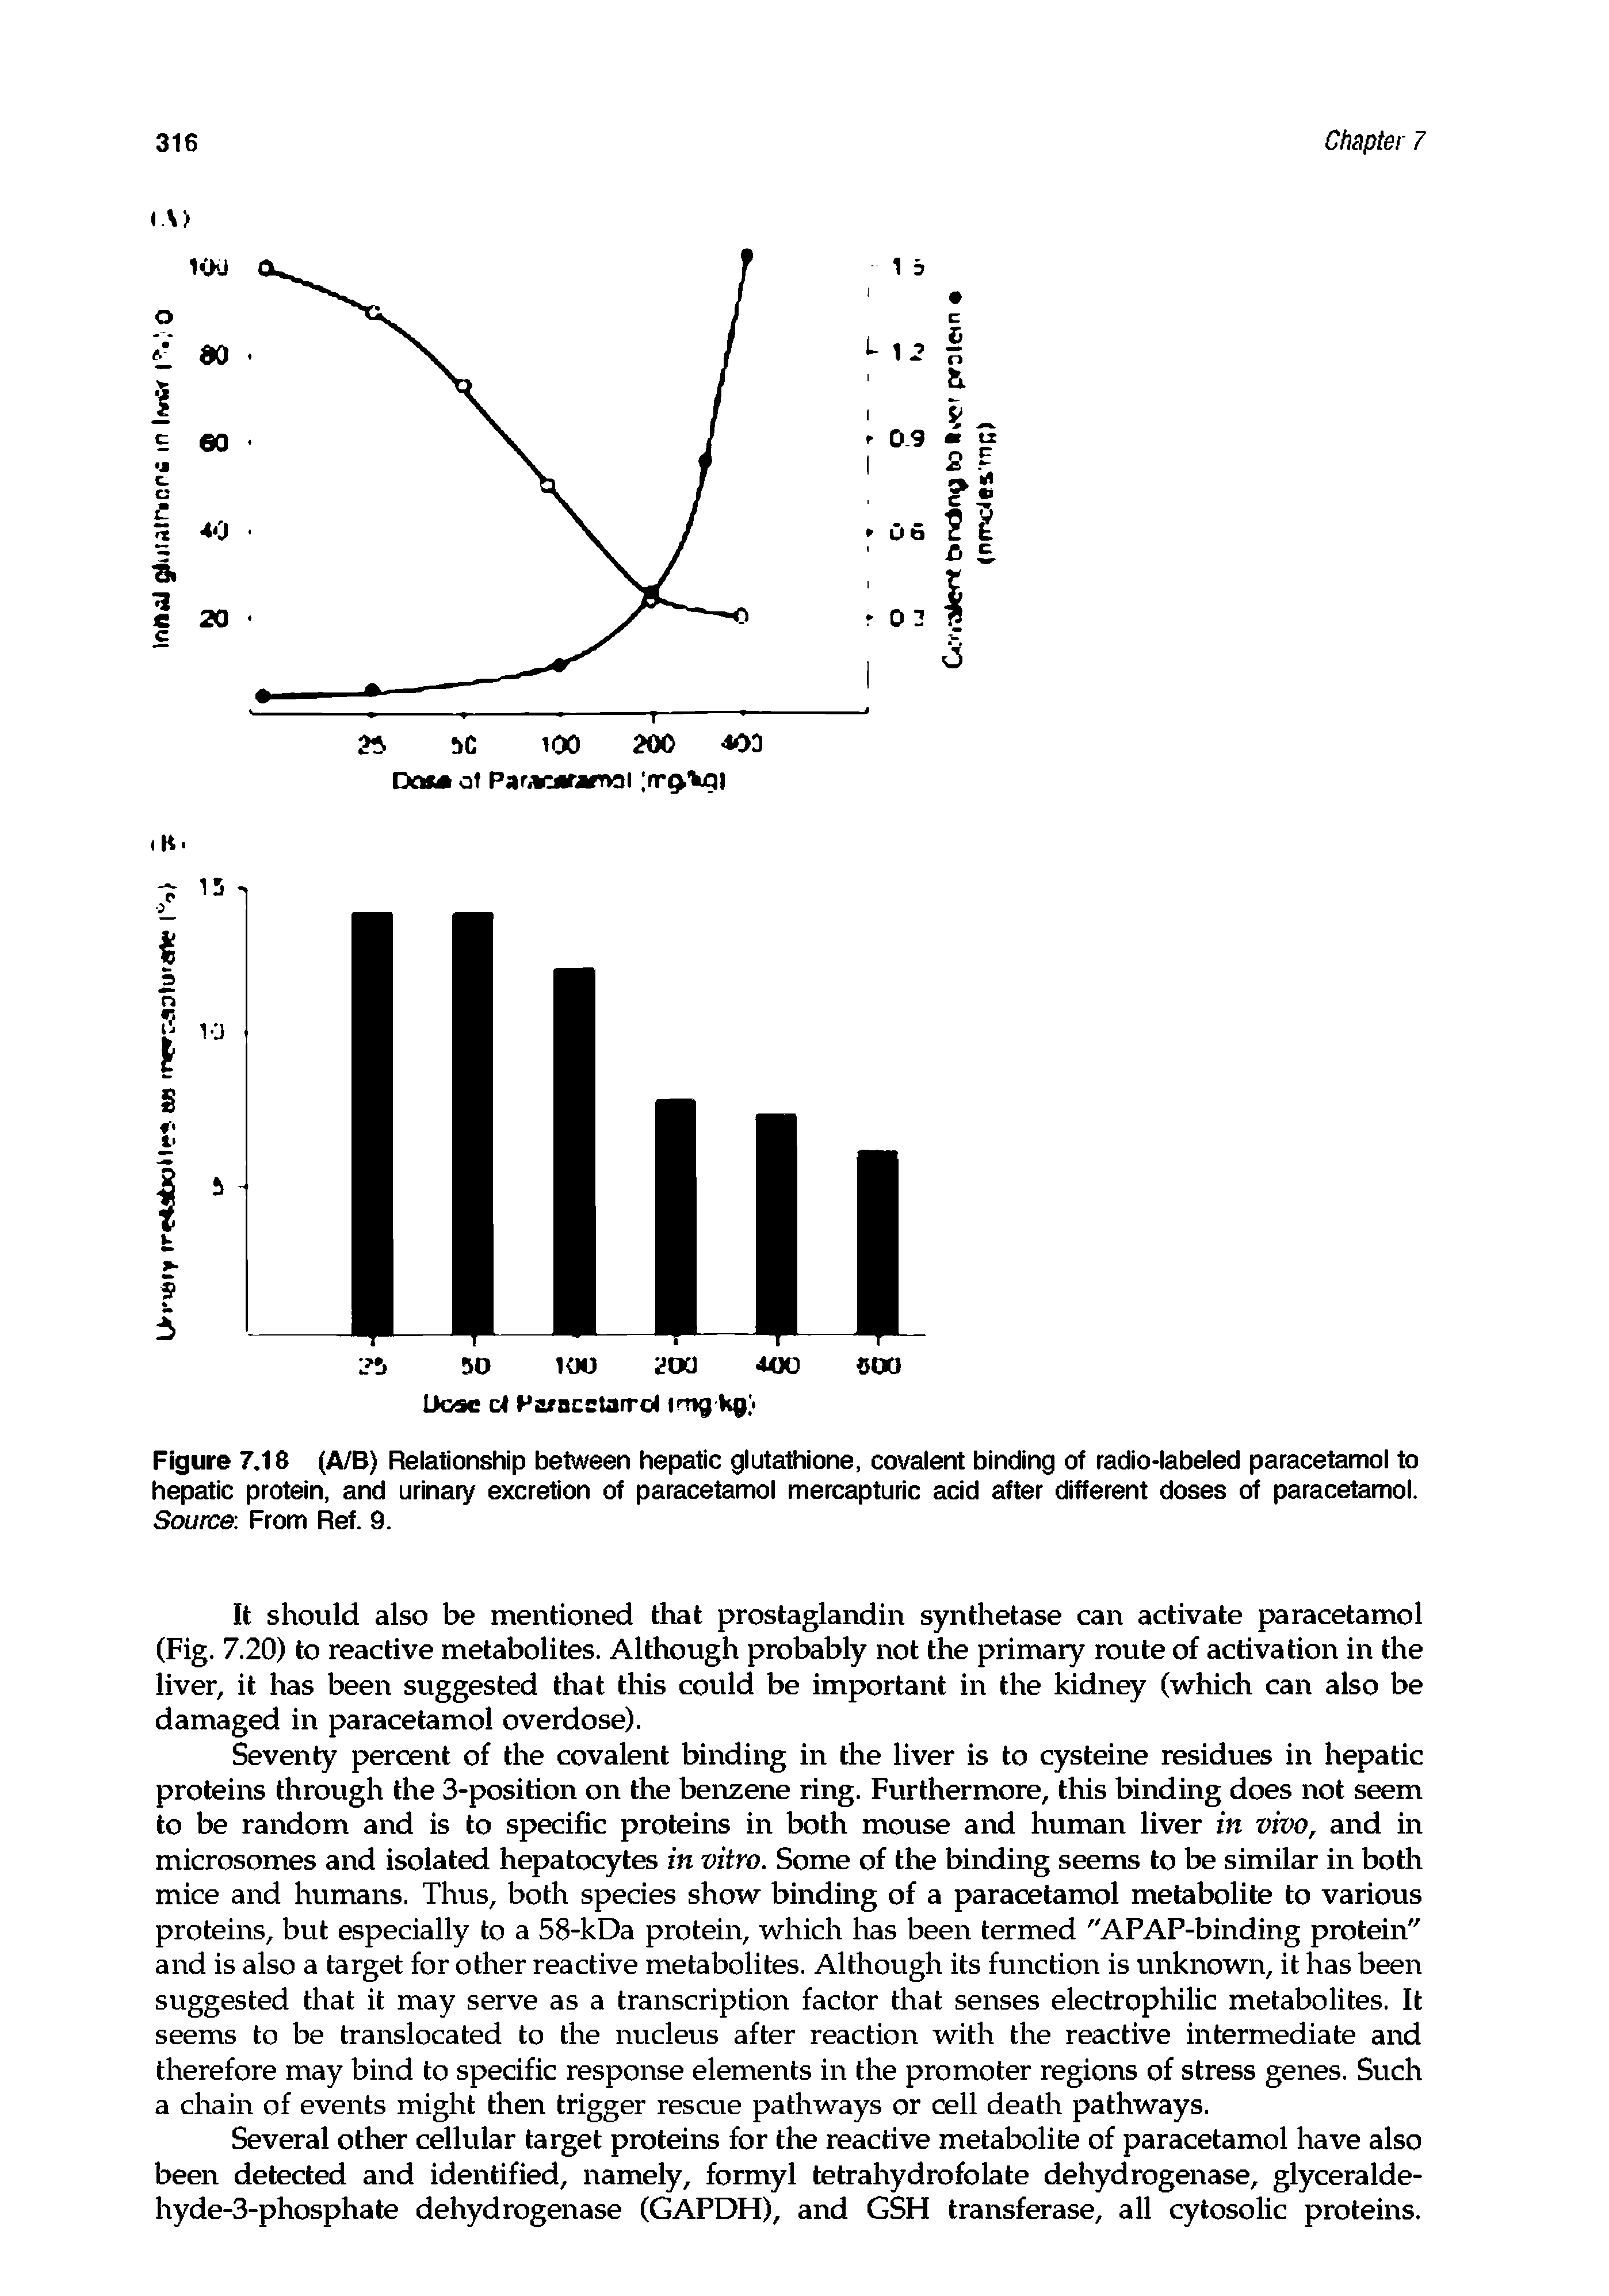 Figure 7.18 (A/B) Relationship between hepatic glutathione, covalent binding of radio-labeled paracetamol to hepatic protein, and urinary excretion of paracetamol mercapturic acid after different doses of paracetamol. Source. From Ref. 9.